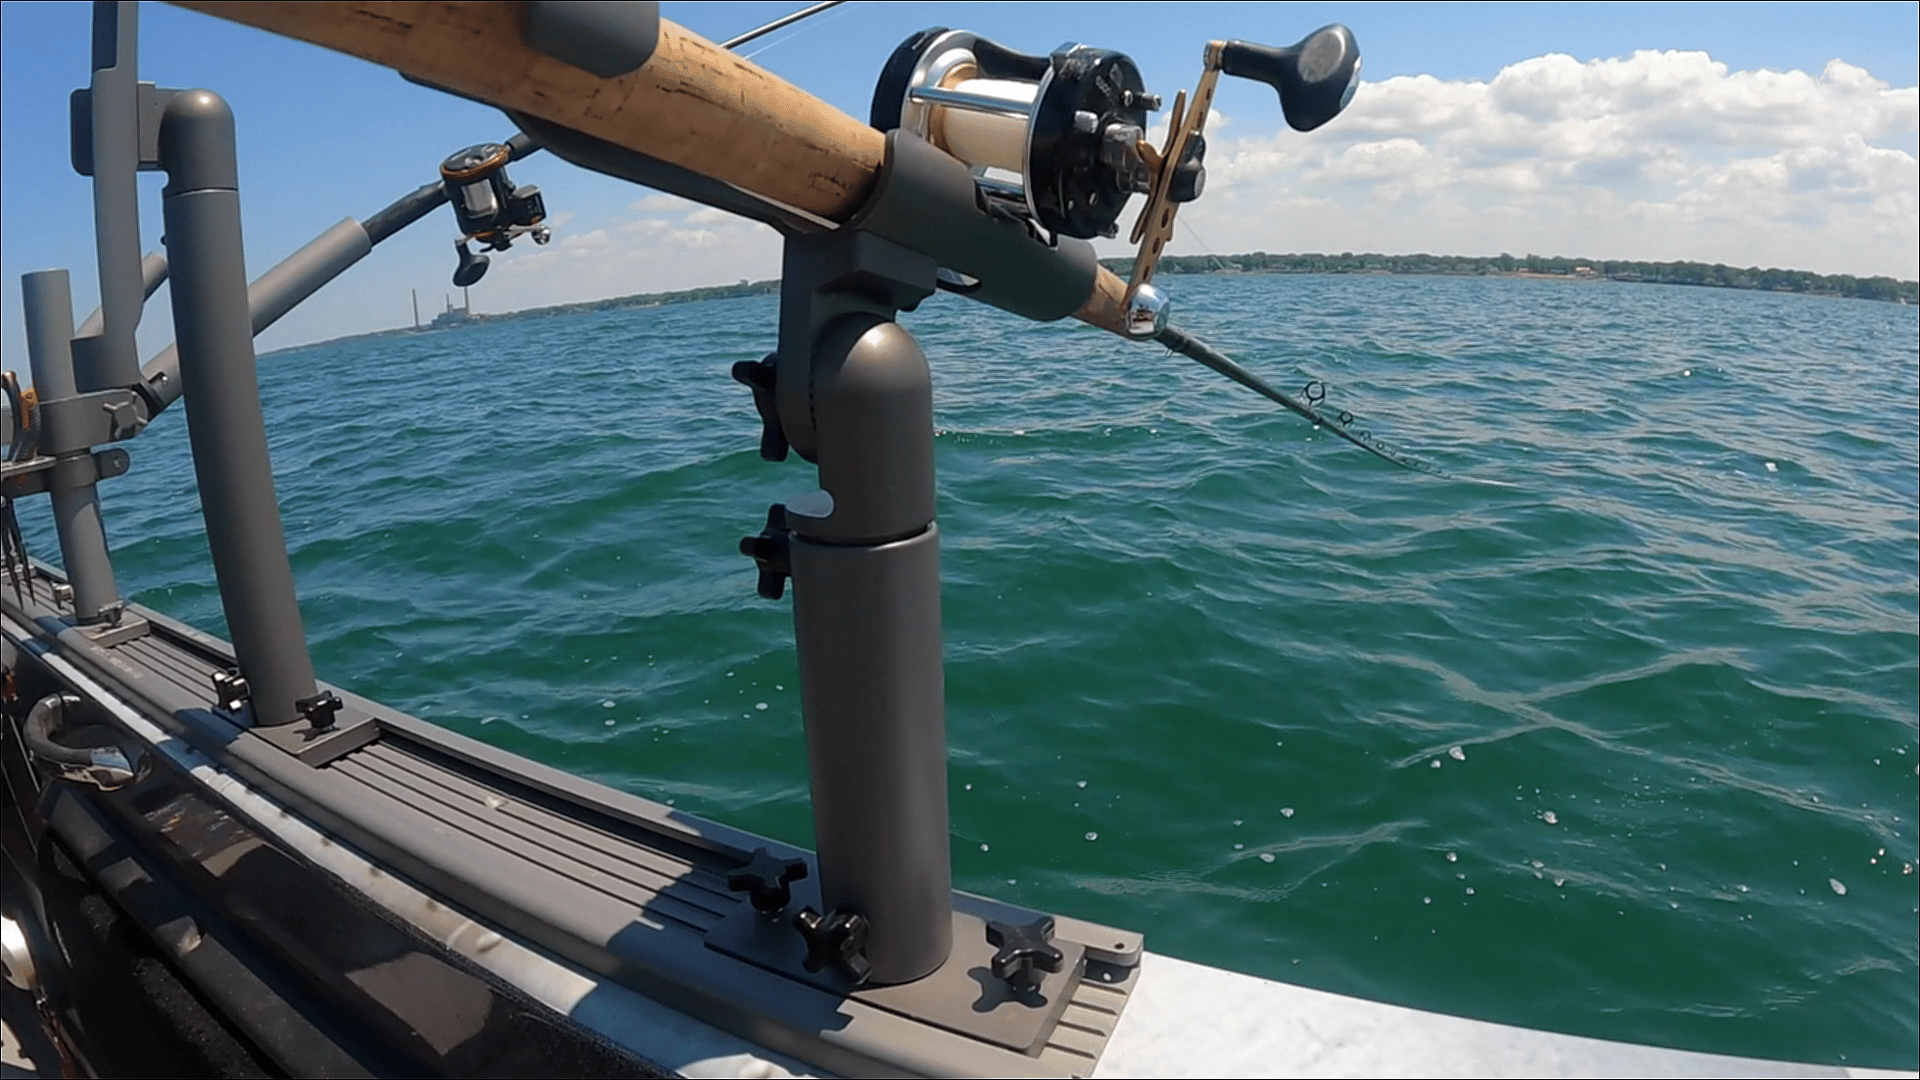 Rod Holders, Downriggers, Boat Track Systems